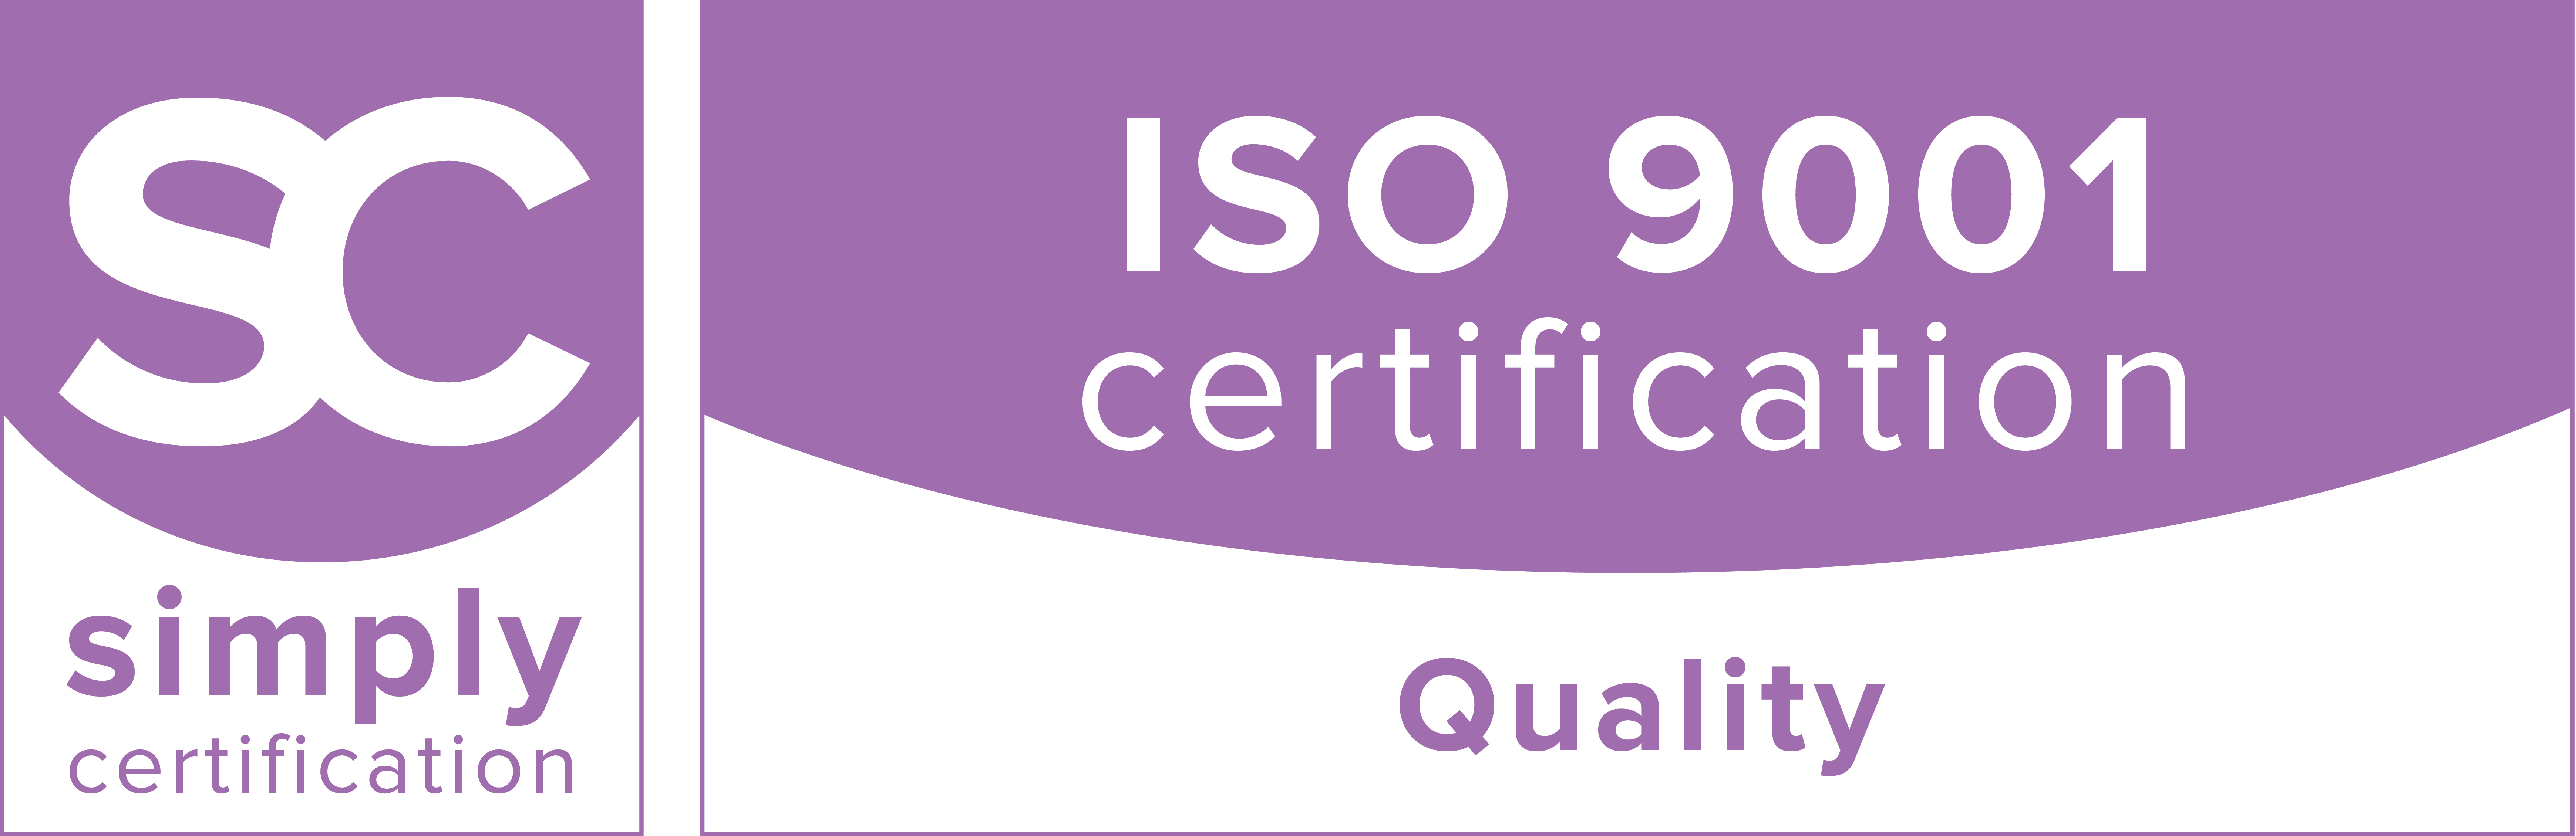 Simply Certification - ISO 9001